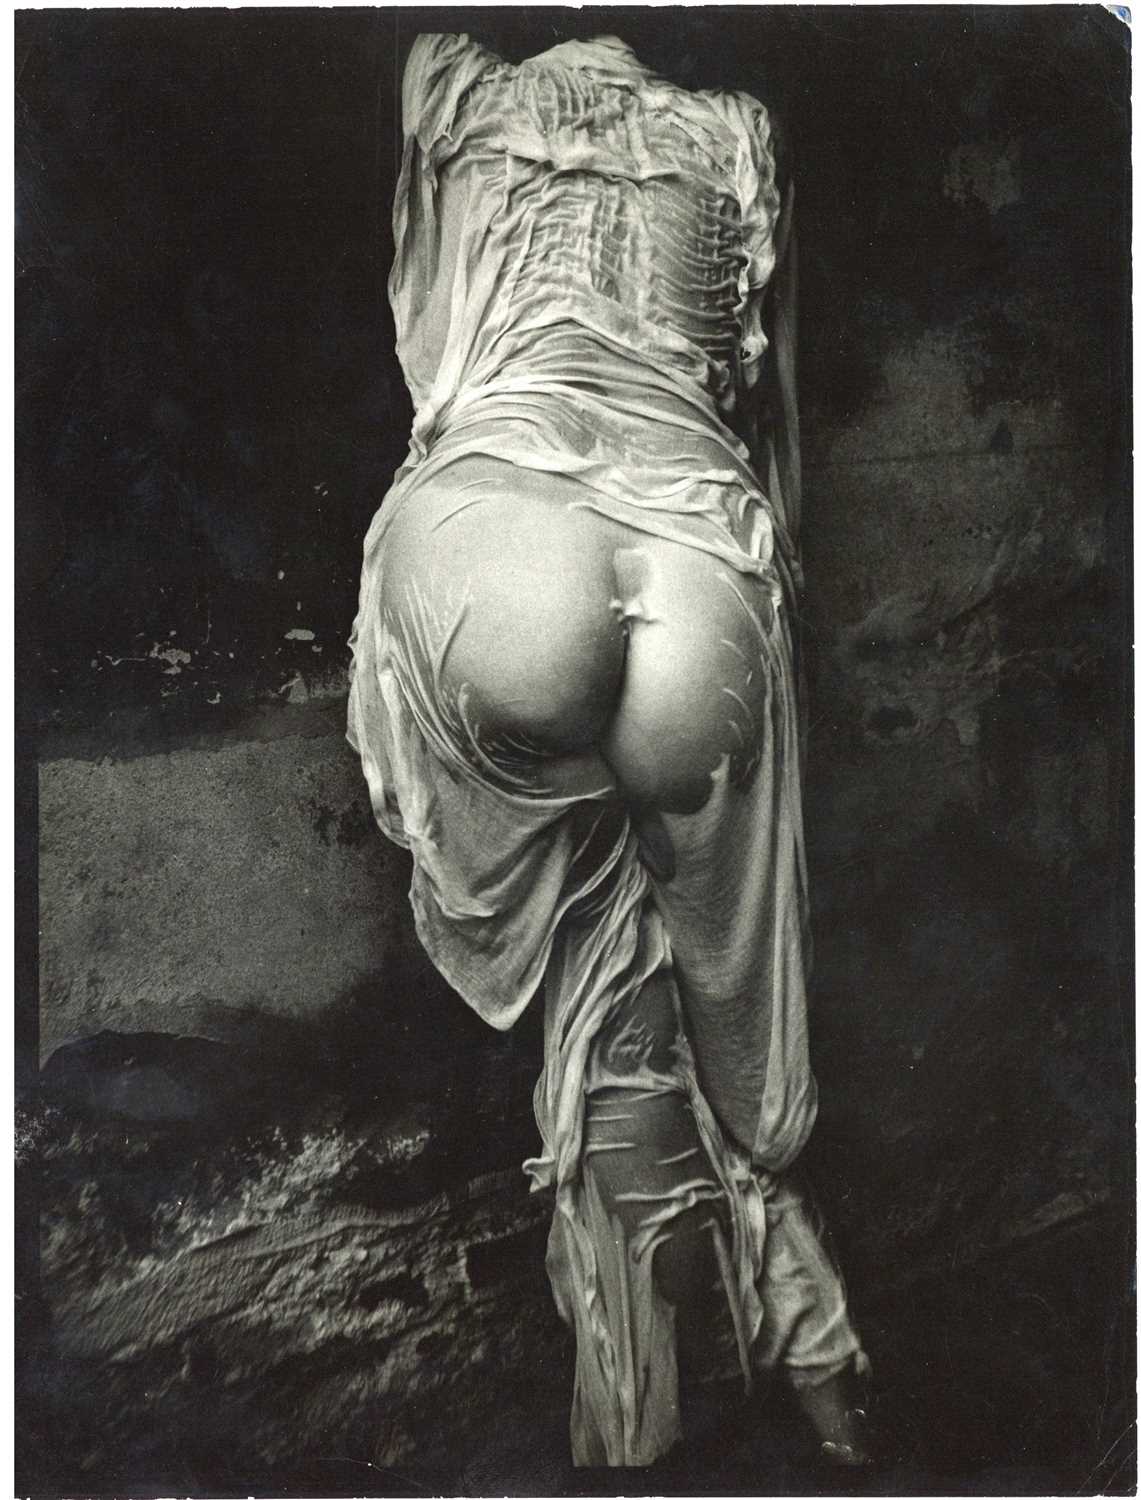 Lot 62 - JAN SAUDEK, (b.1935) Pavla Poses for the First and Last Time, 1987